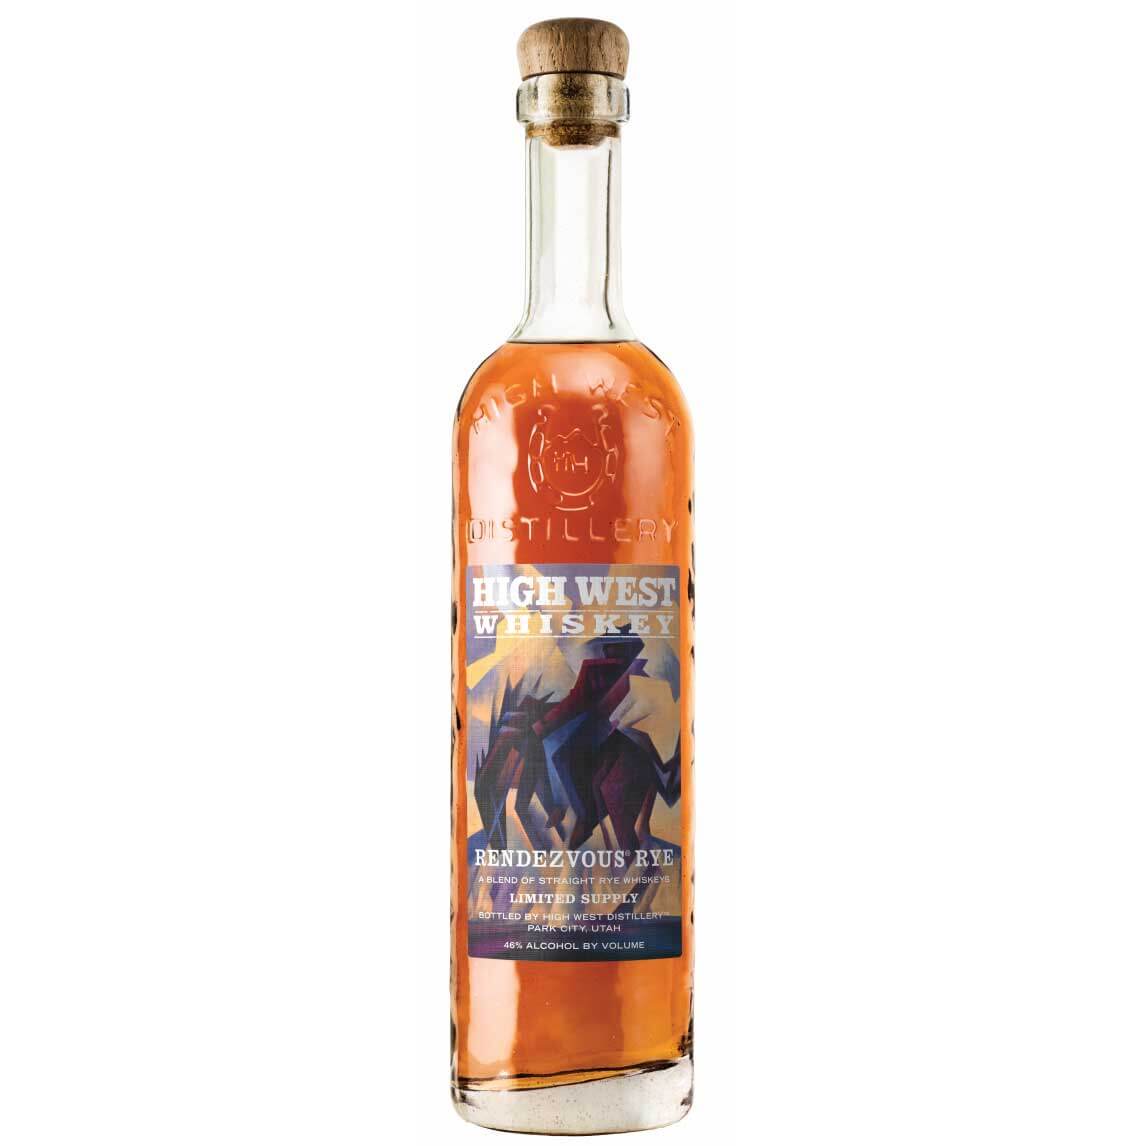 High West Rendezvous Rye 2021 label by Ed Mell